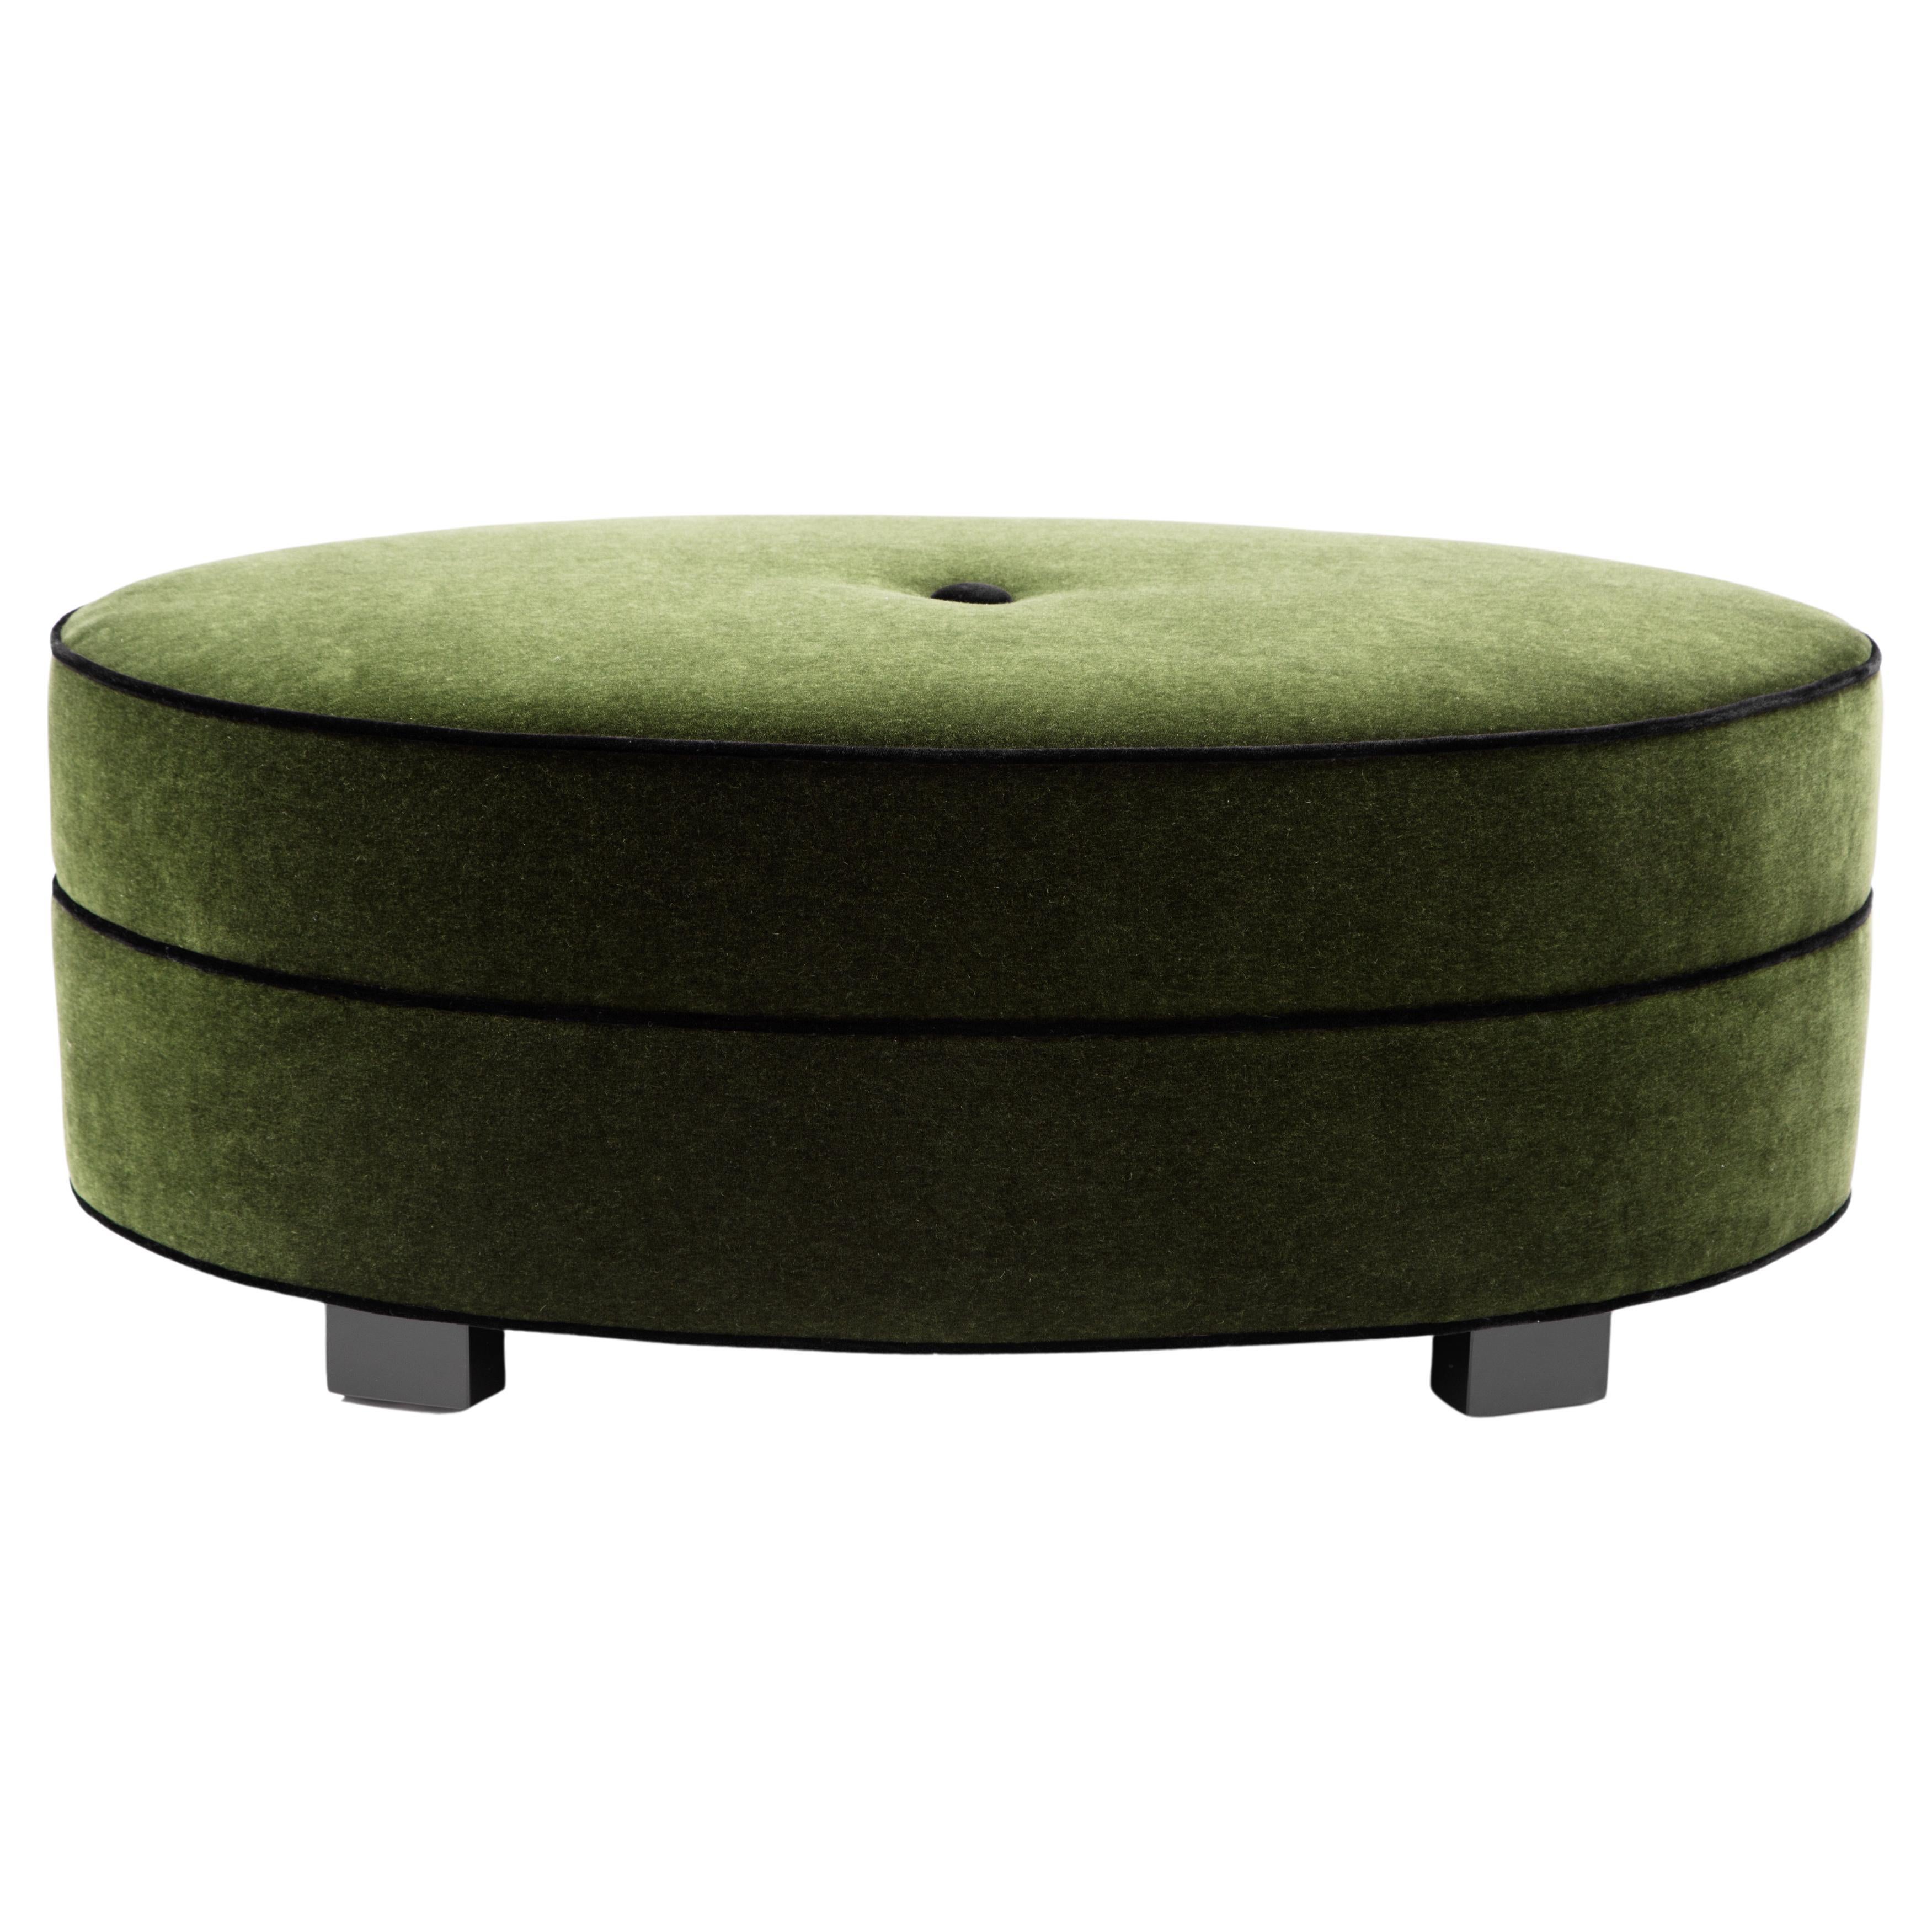 Art Deco Alessandra Ottoman Handcrafted by JAMES by Jimmy DeLaurentis For Sale